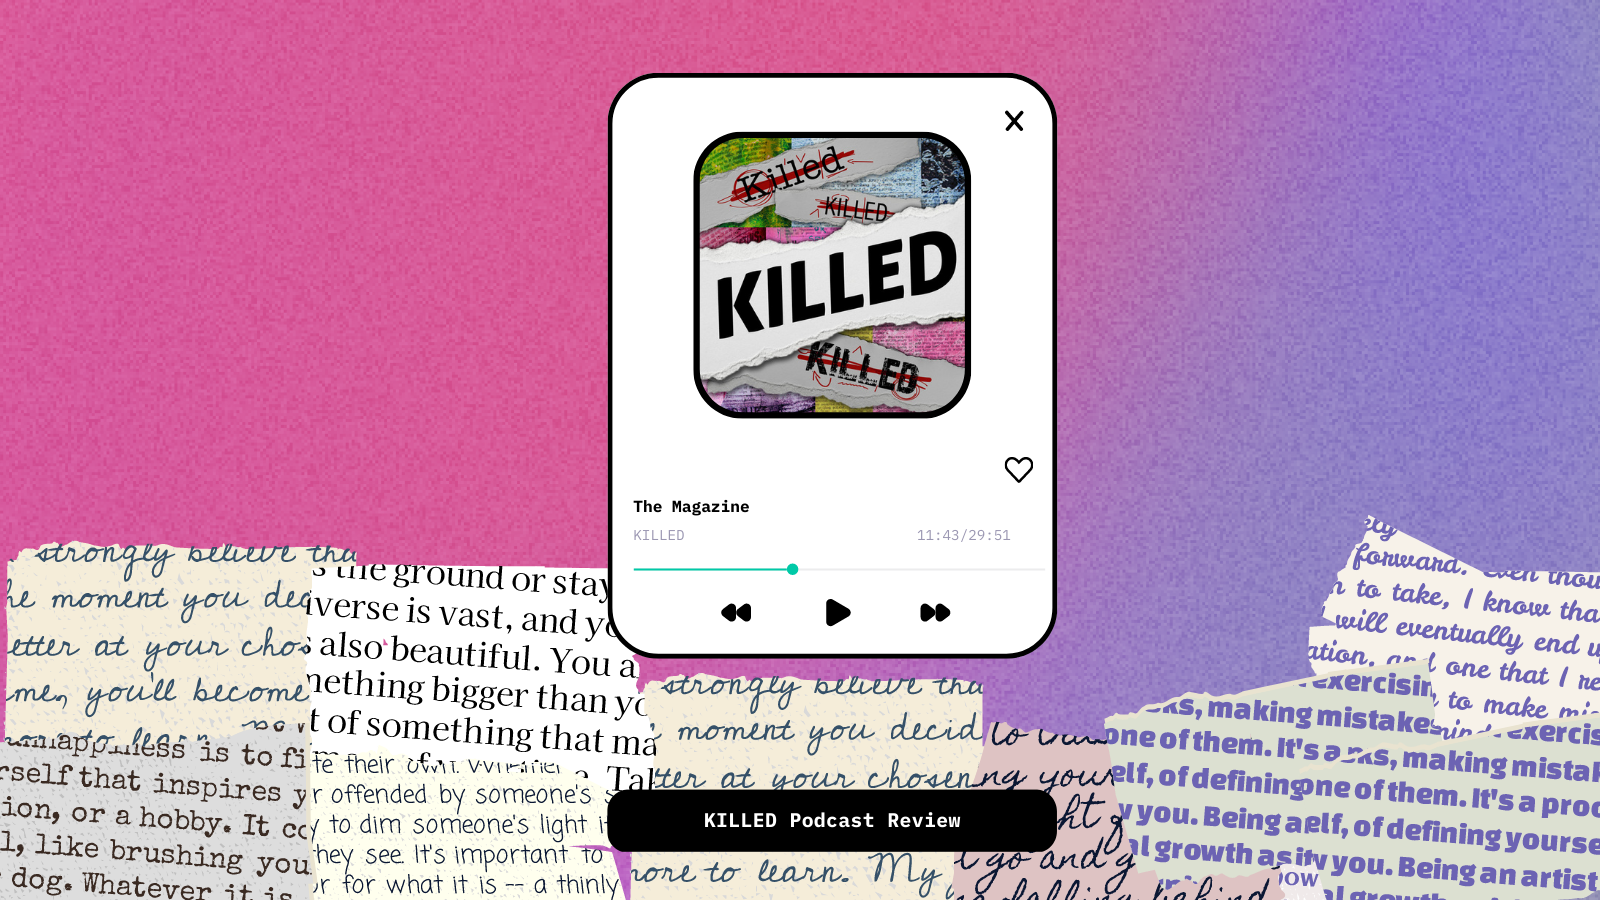 killed podcast, killed podcast review, killed podcast by audiochuck, podcast reviews, podcast criticism, recommendation